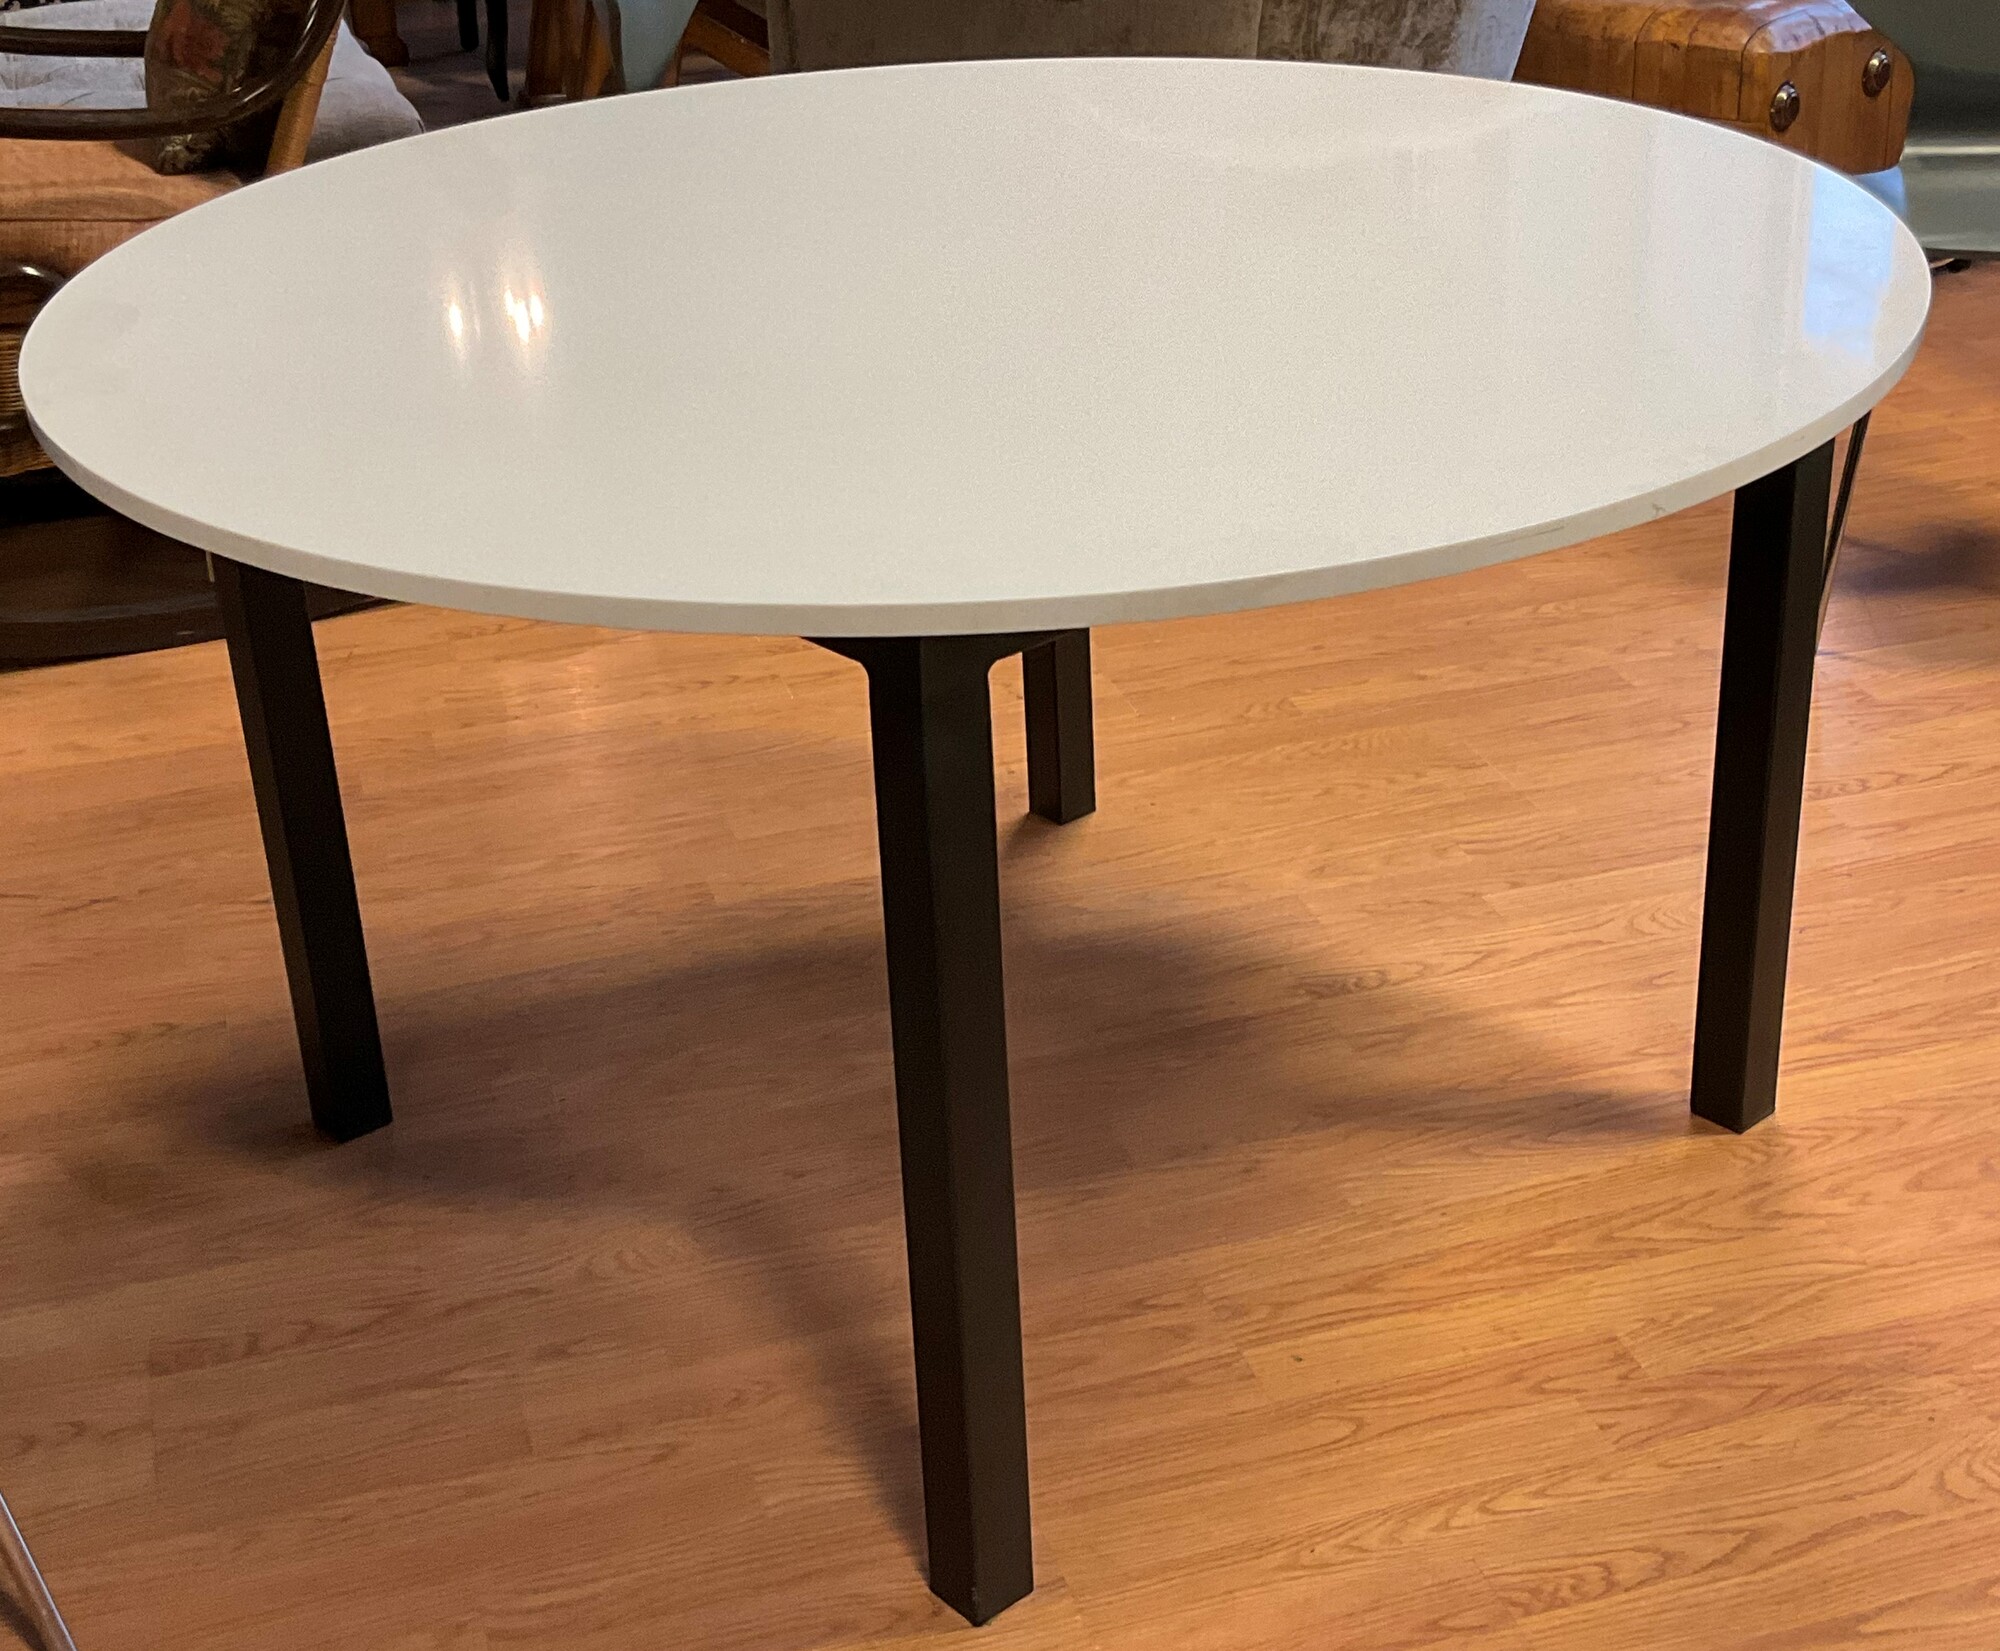 Metal Base Quartz Top Dining Table
White, Round
52 X 52 29.25in(H)